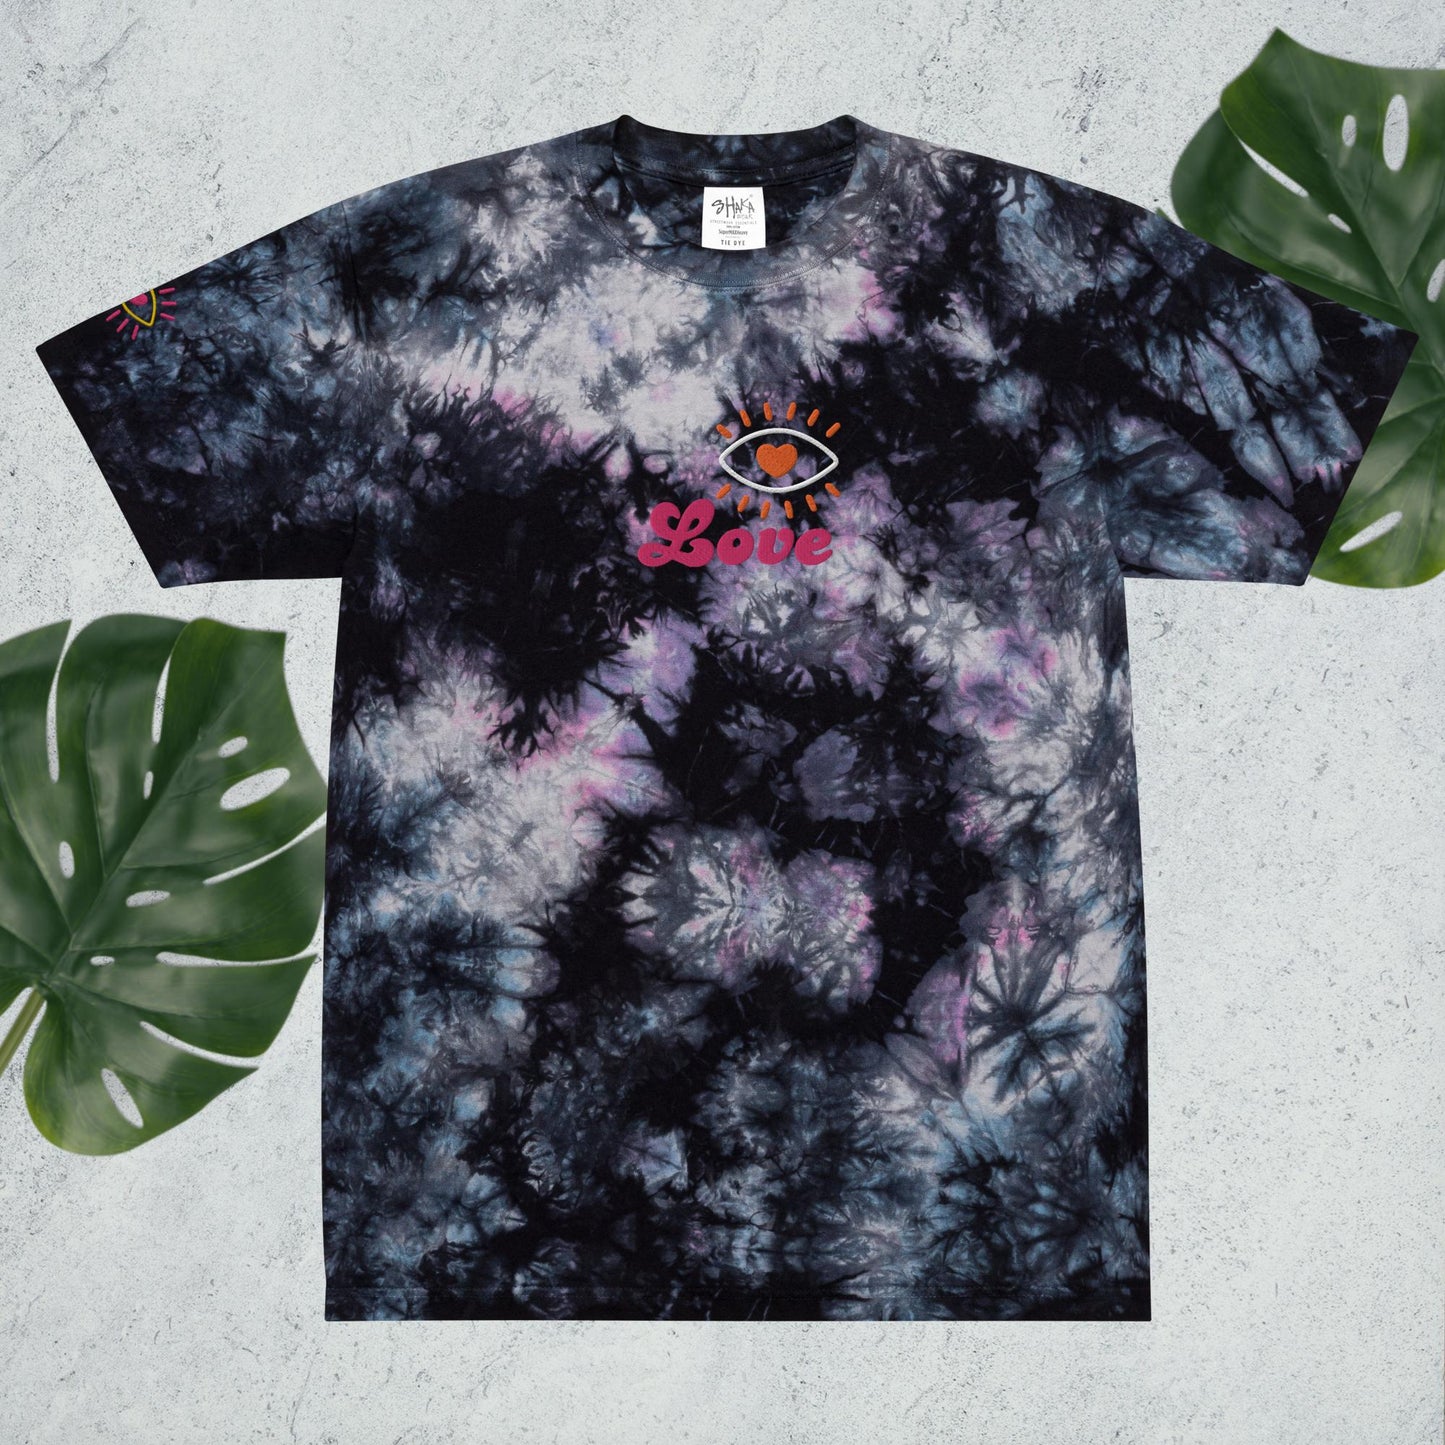 LOVE Embroidered oversized tie-dye tee